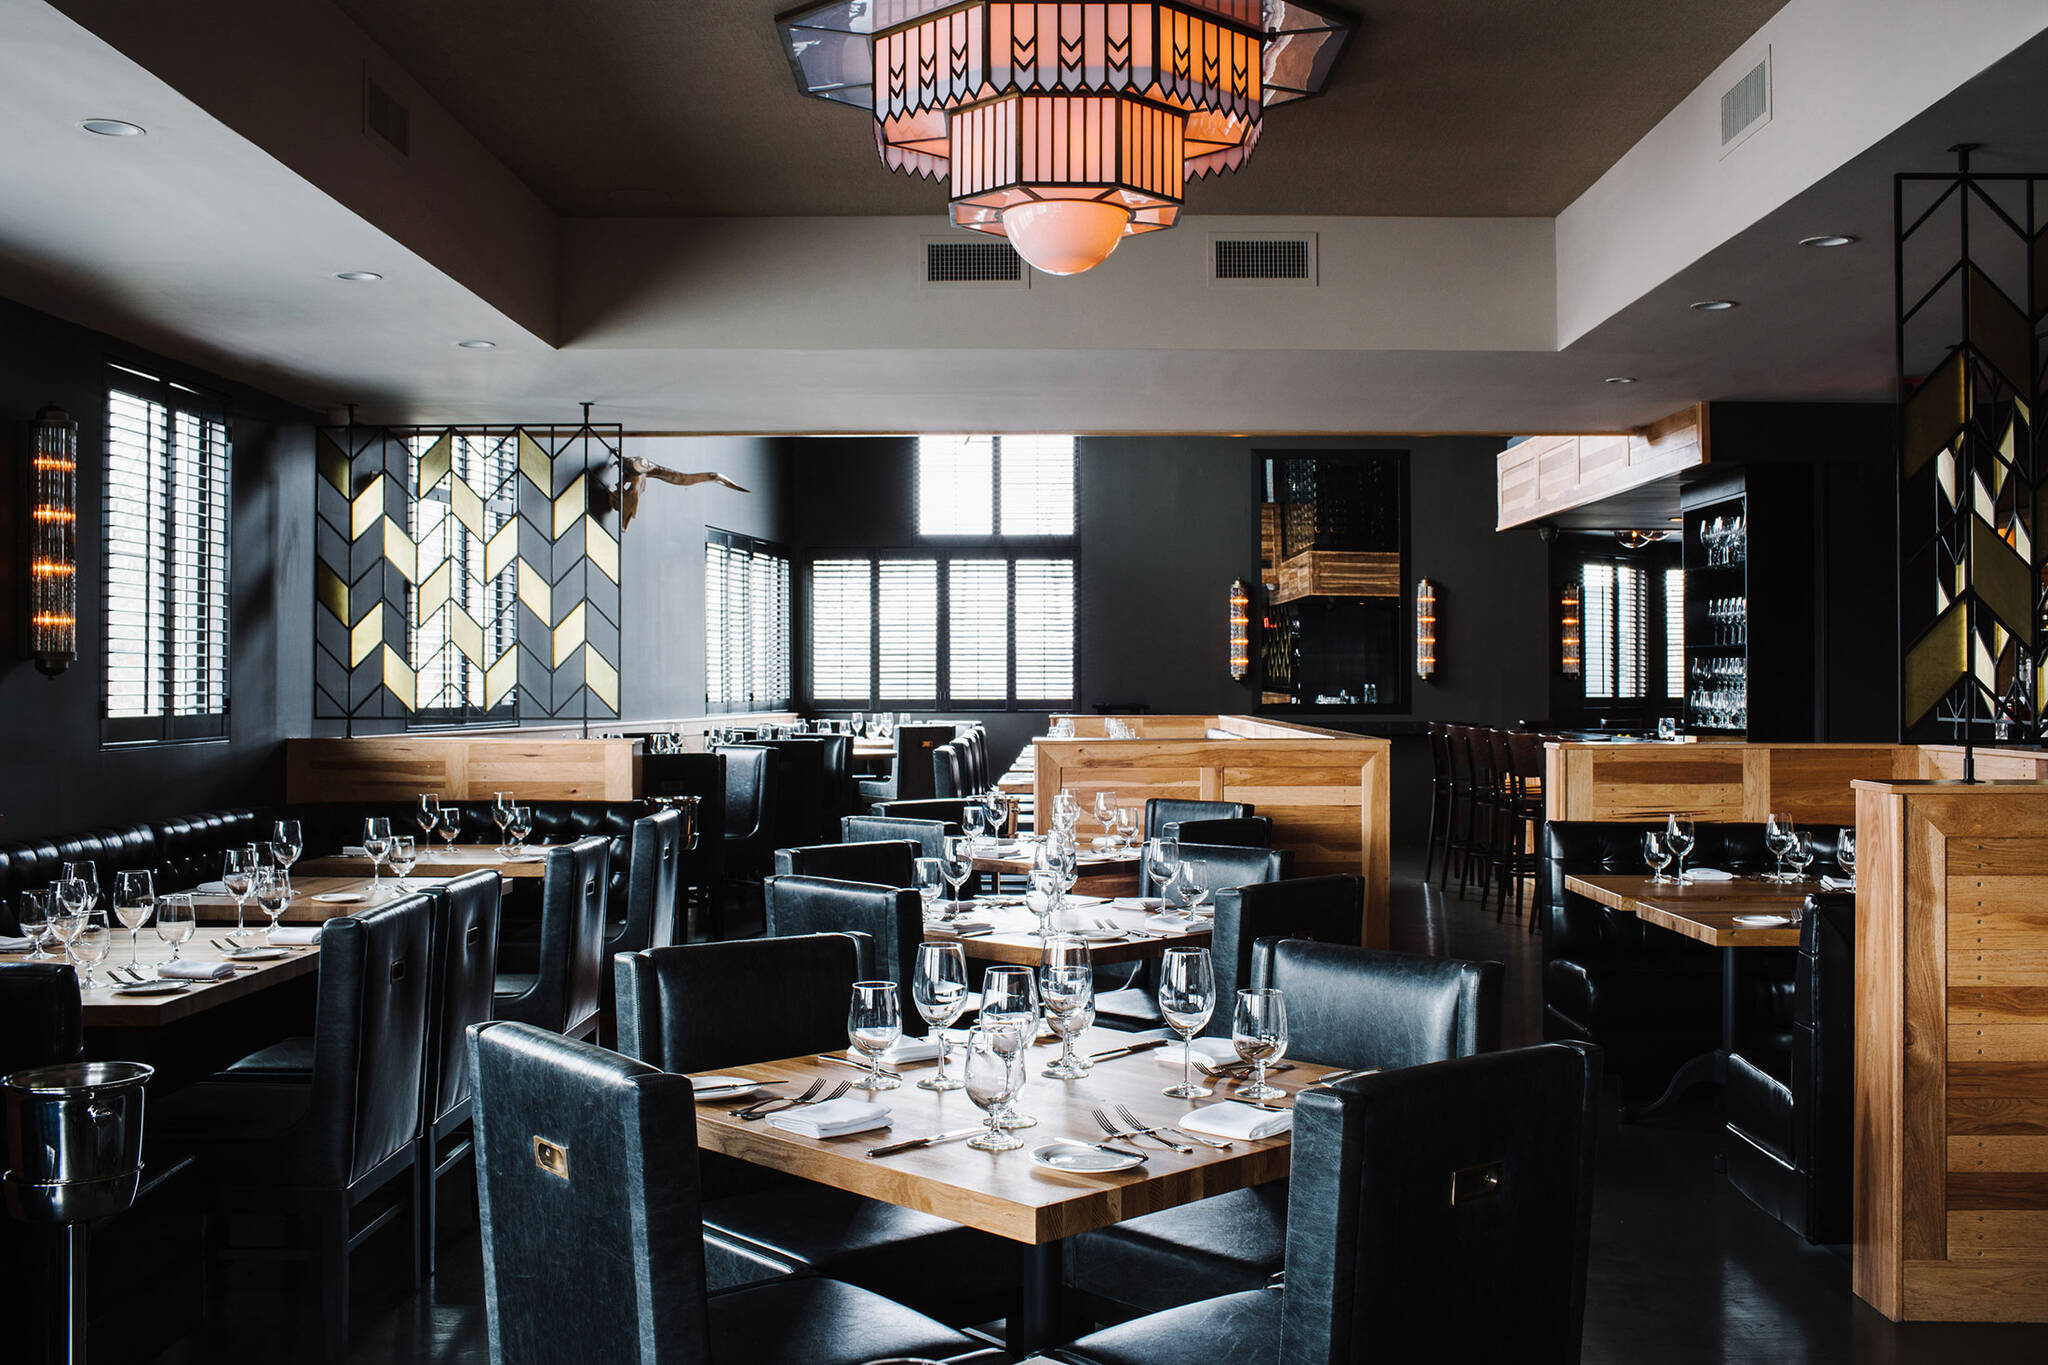 Intimate dining area of the American Cut Bar & Grill project located at 495 Sylvan Avenue in Englewood Cliffs, New Jersey designed by the architecture studio Danny Forster & Architecture